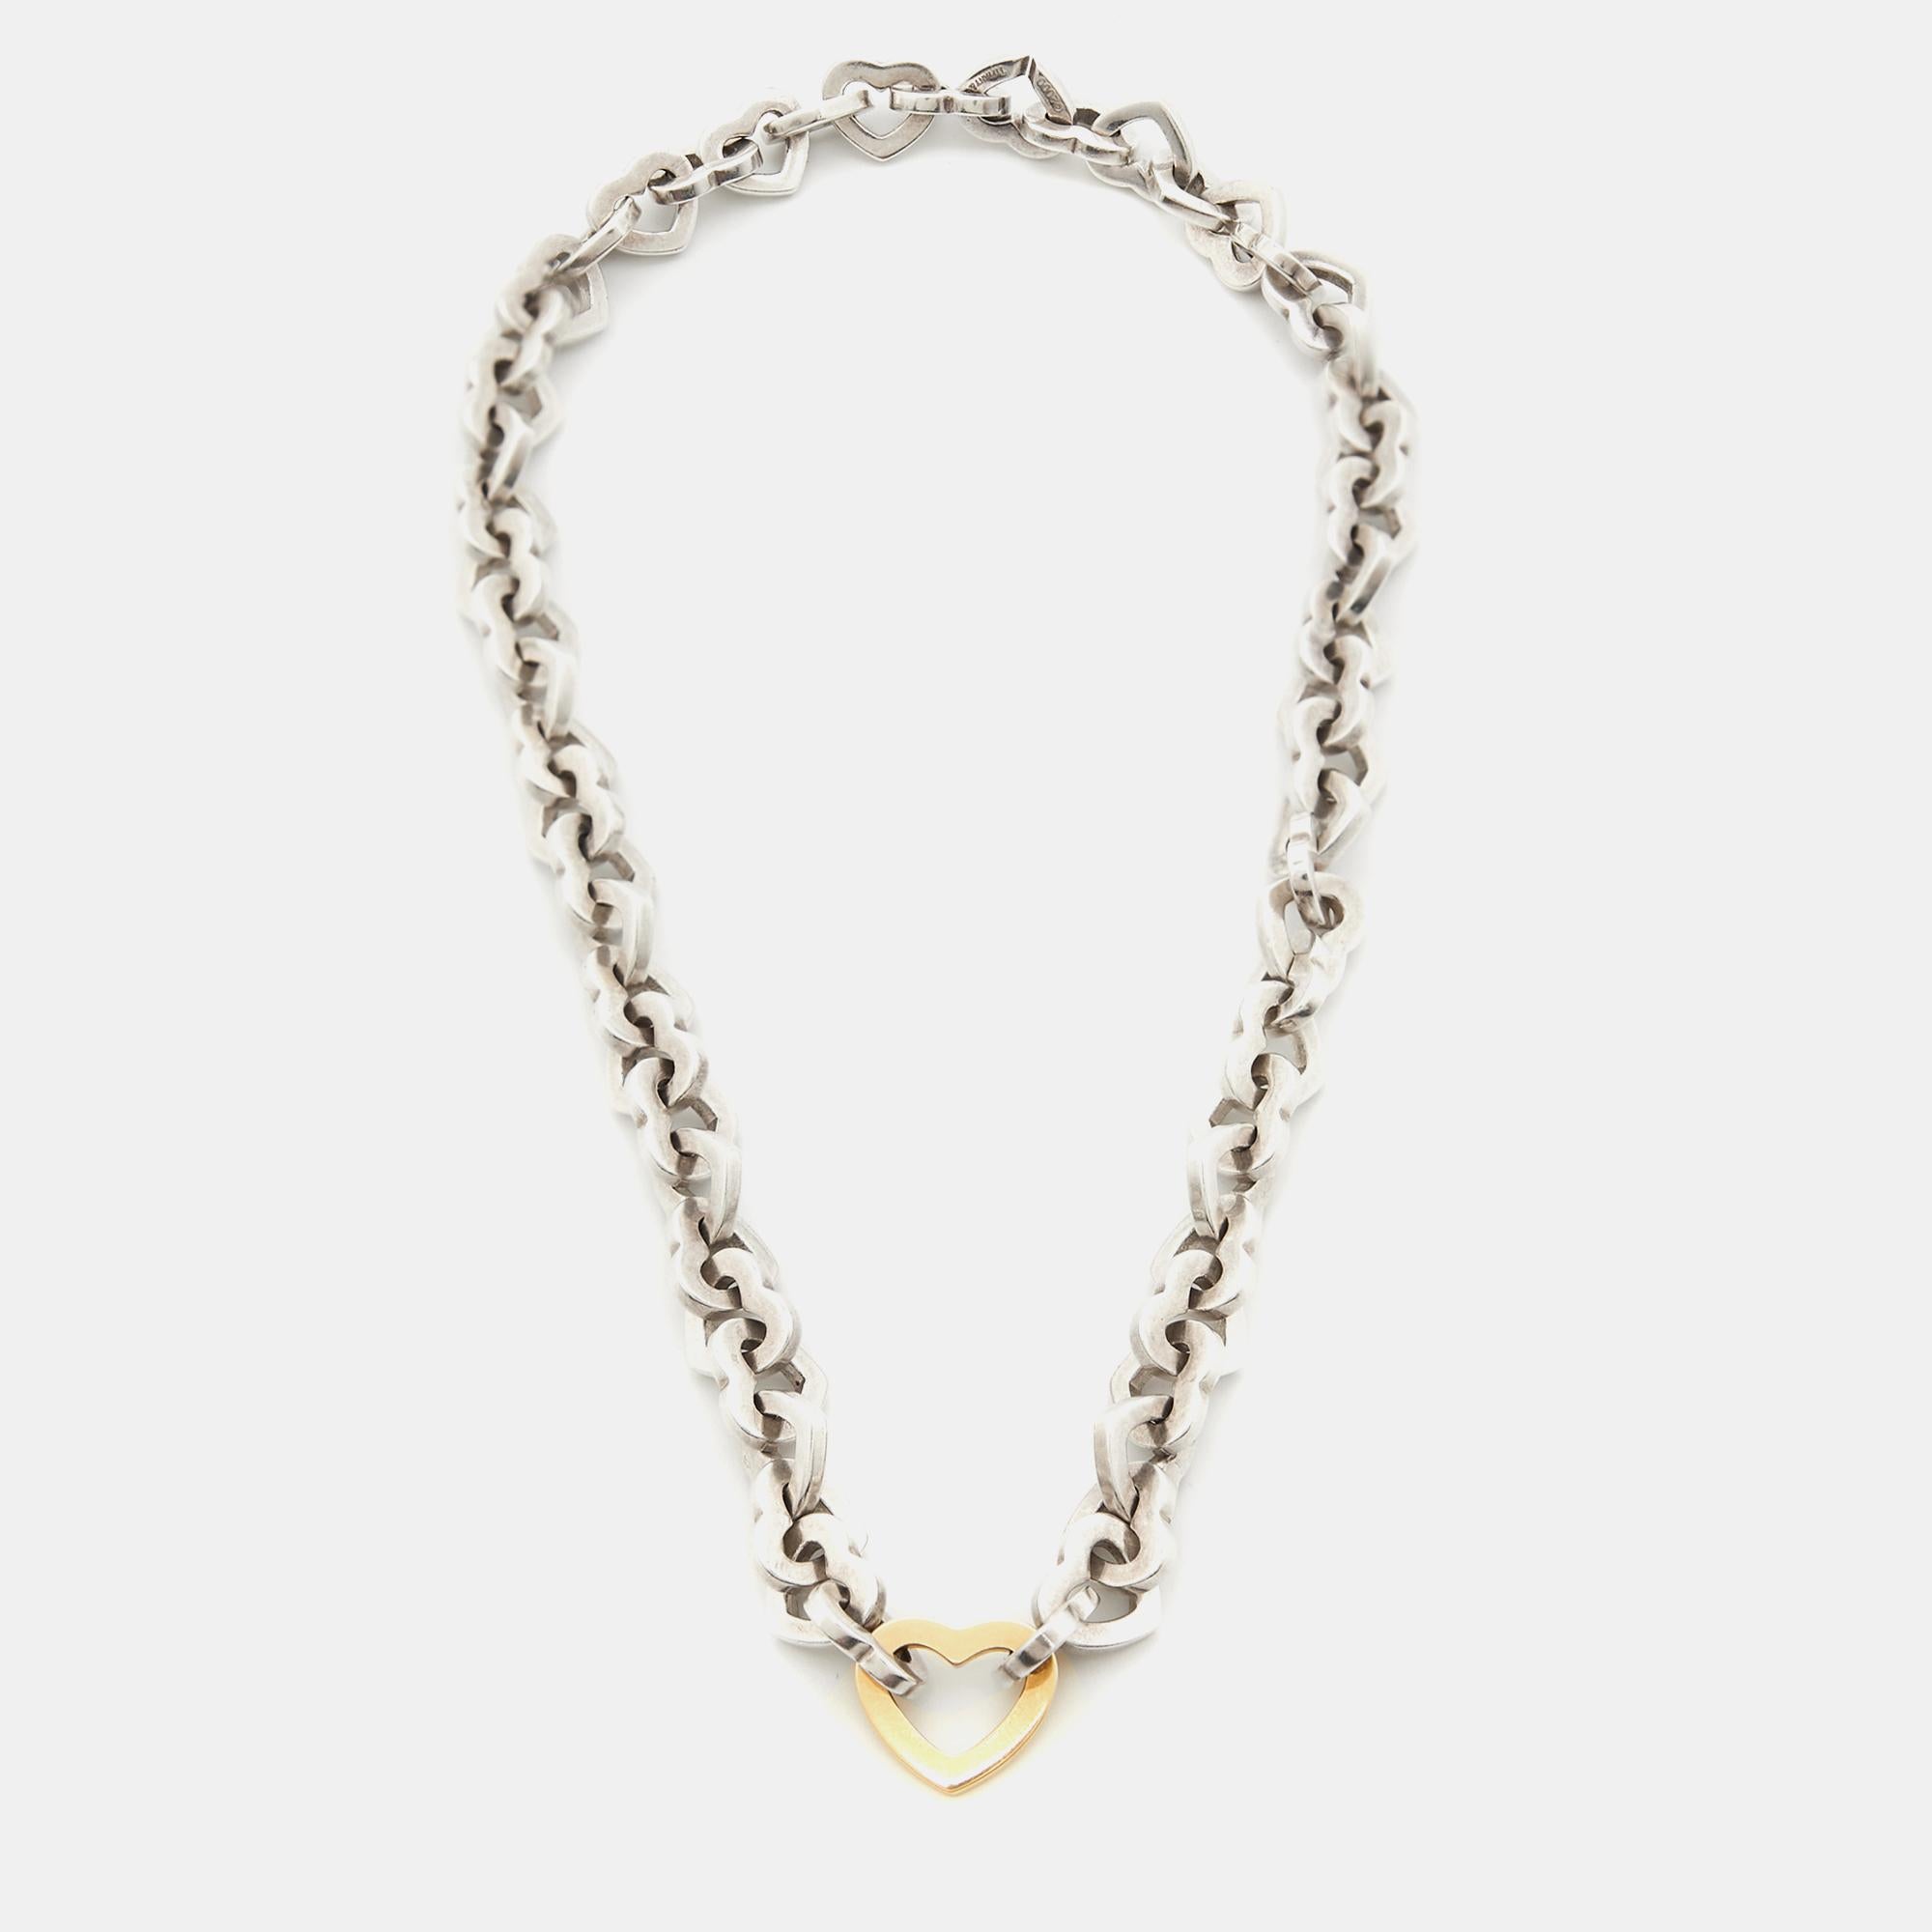 Presenting the exquisite Tiffany & Co. necklace, a stunning blend of sterling silver and 18k yellow gold. This captivating piece exudes timeless charm with its heart design, symbolizing love and connection. Elevate your style effortlessly with this